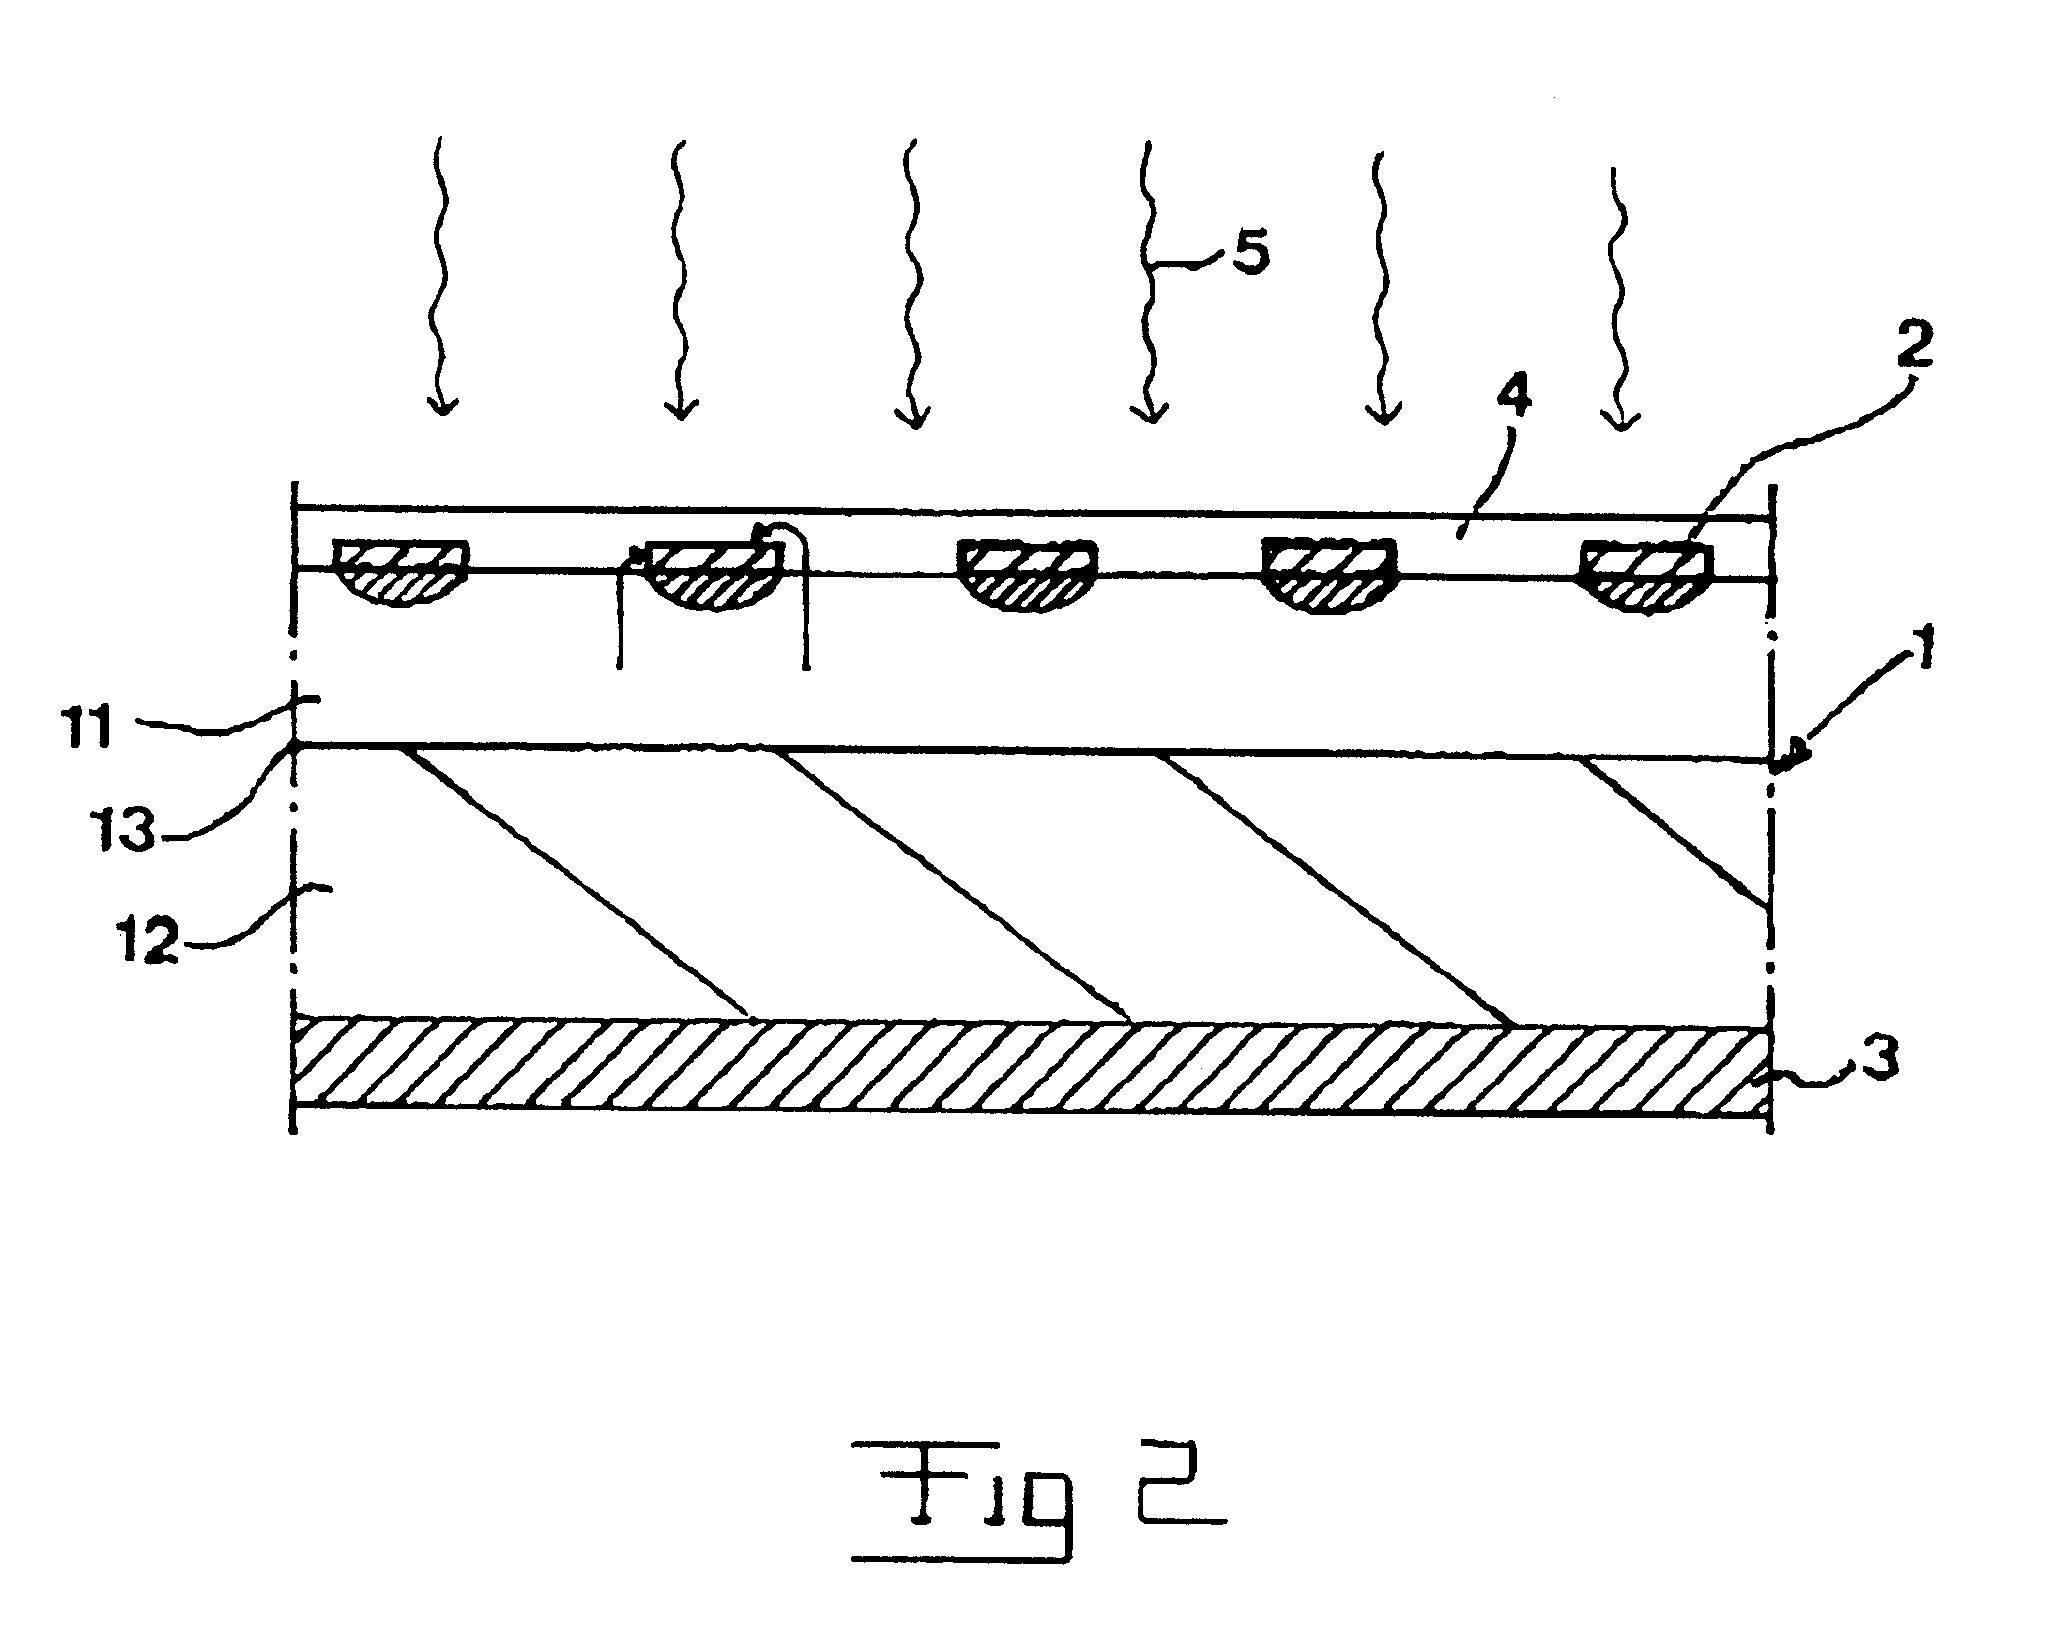 Photoconductive switch with multiple layers